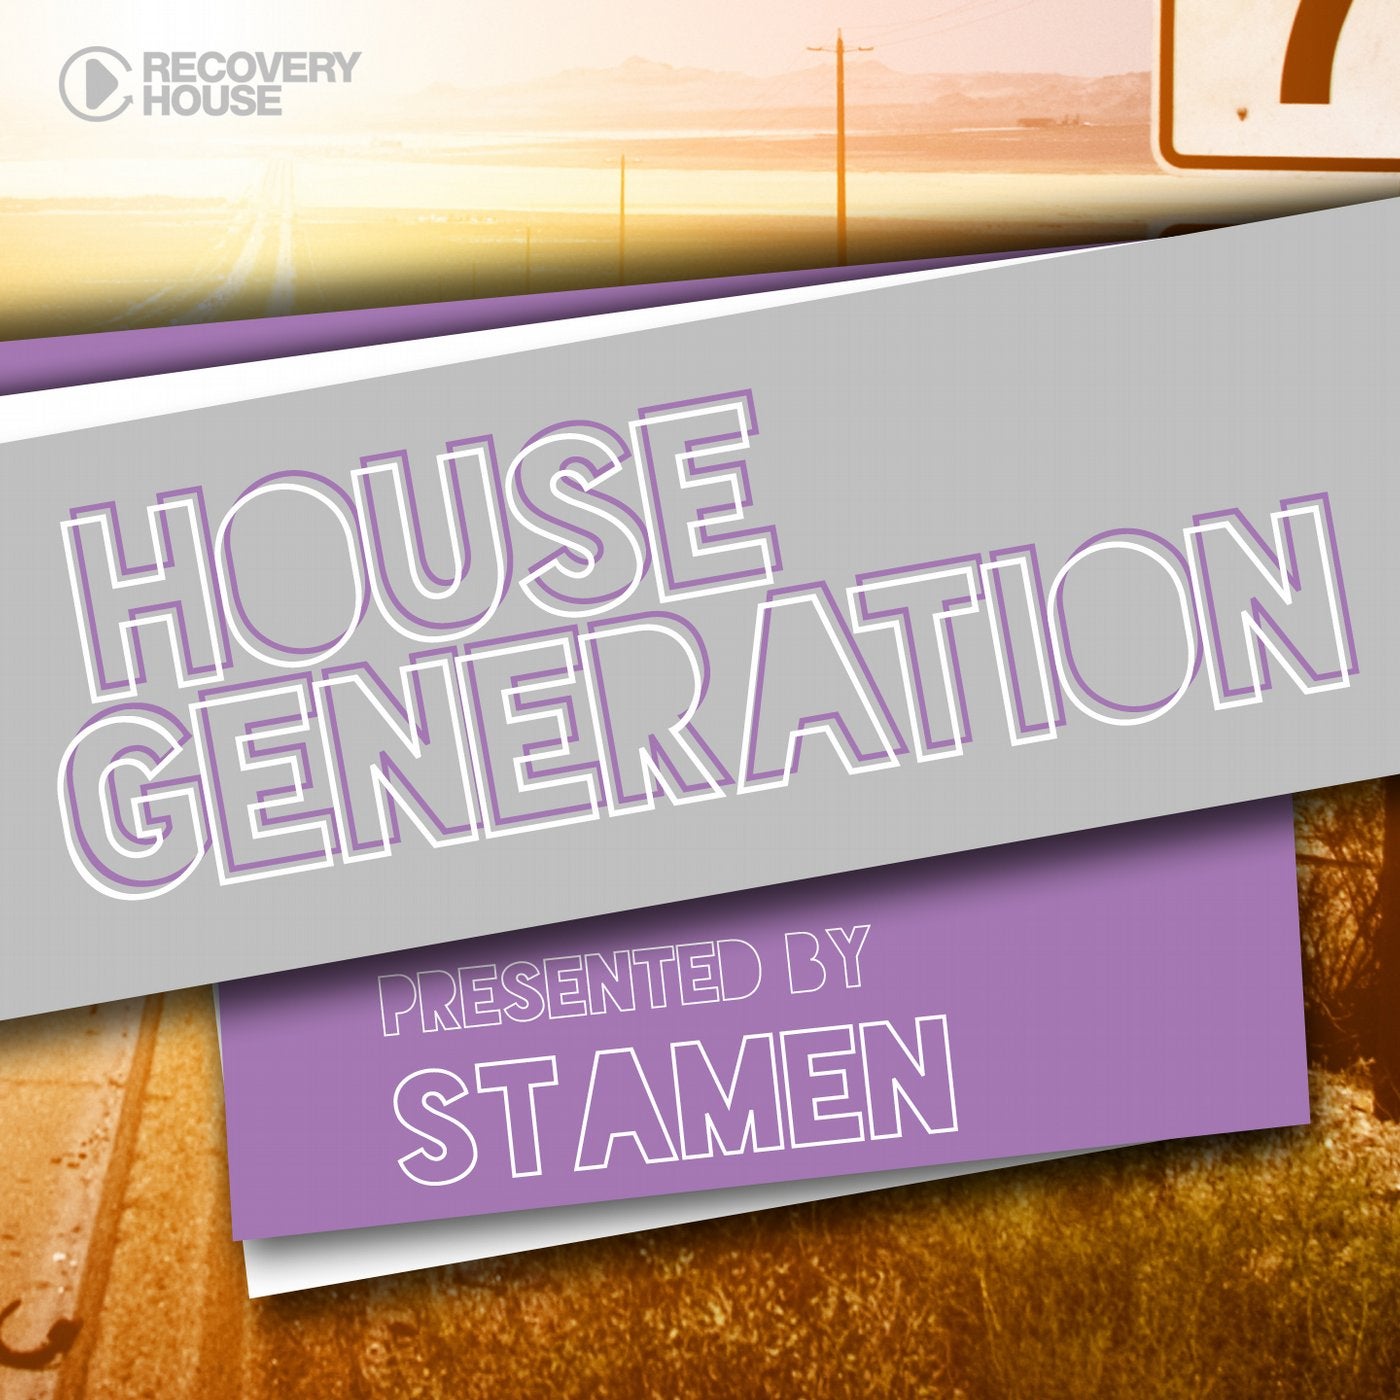 House Generation Presented By Stamen